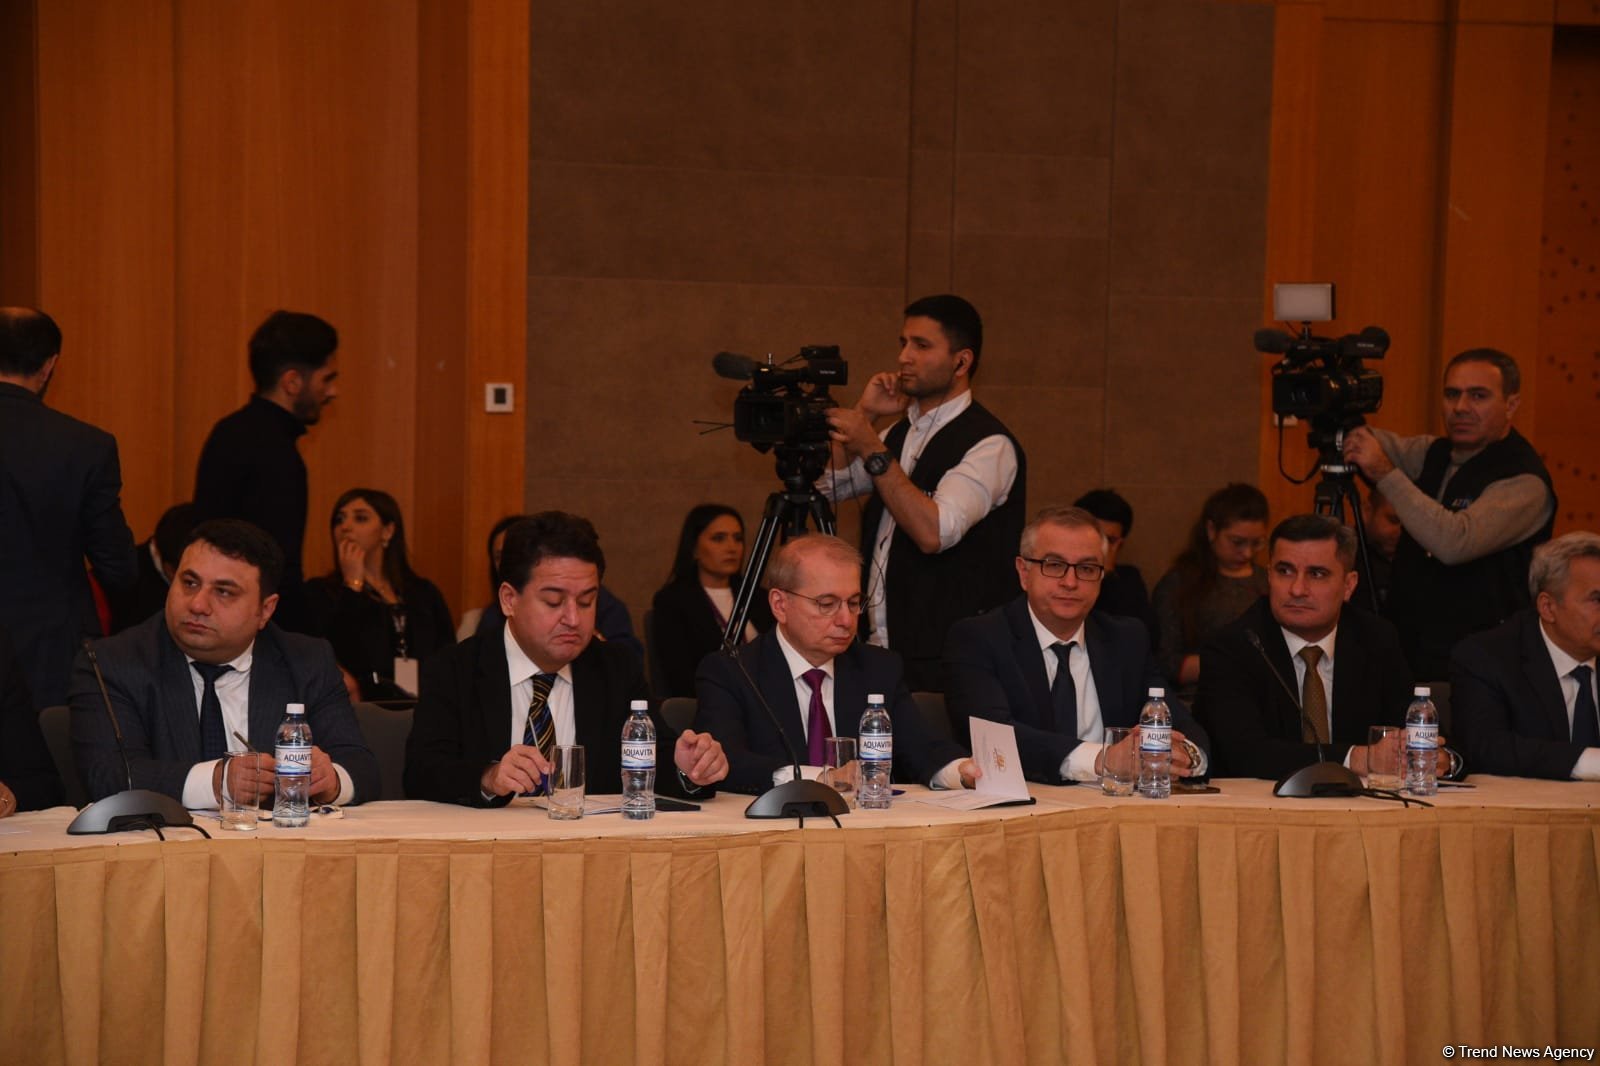 Meeting on equal campaigning options in Azerbaijan's presidential election held (PHOTO)